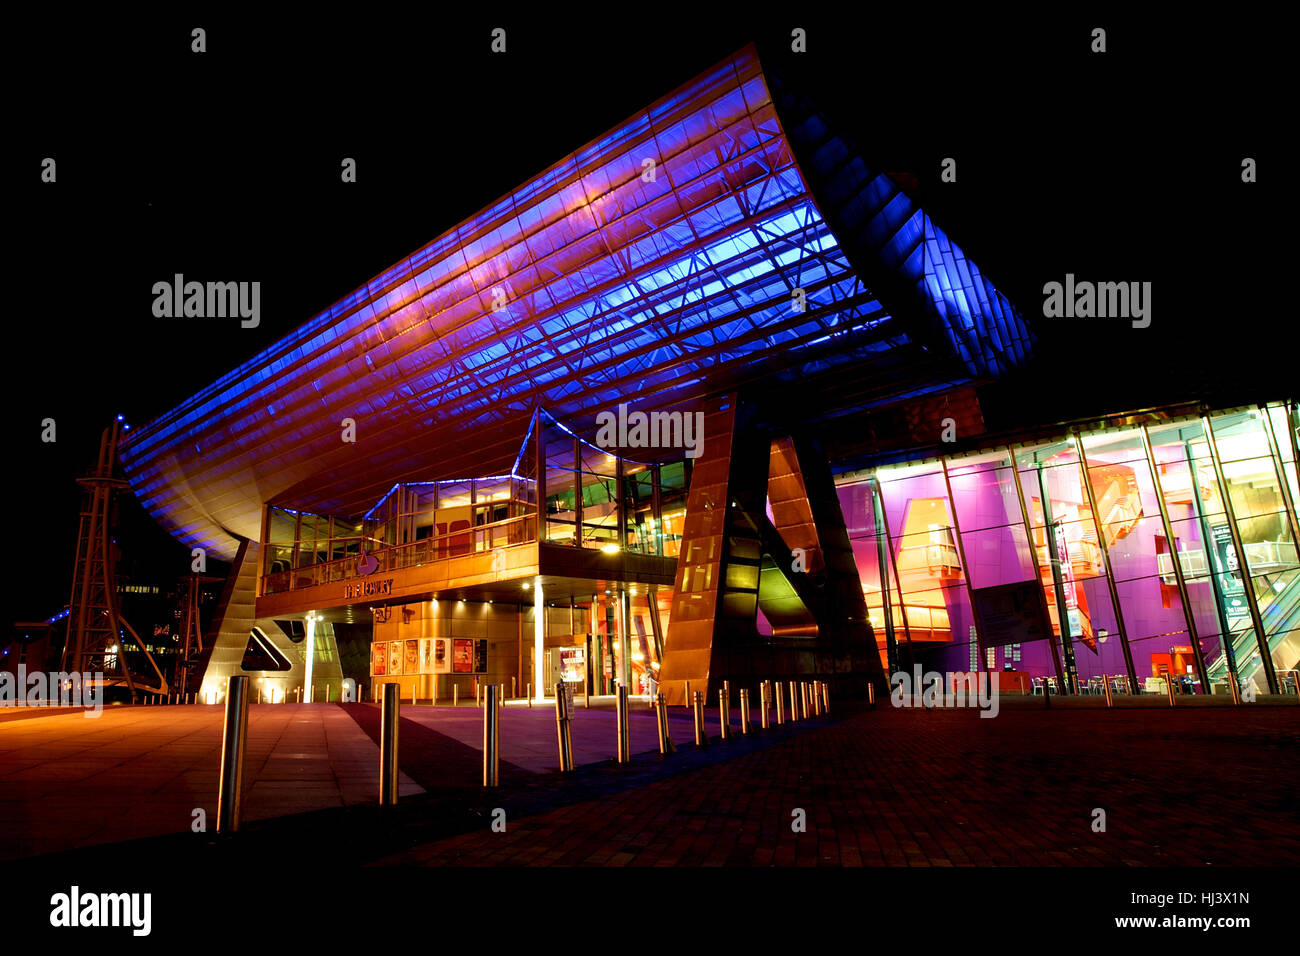 Creativity The Lowry is a theatre and gallery complex situated on Pier 8 at Salford Quays, in Salford, Greater Manchester, England. Stock Photo